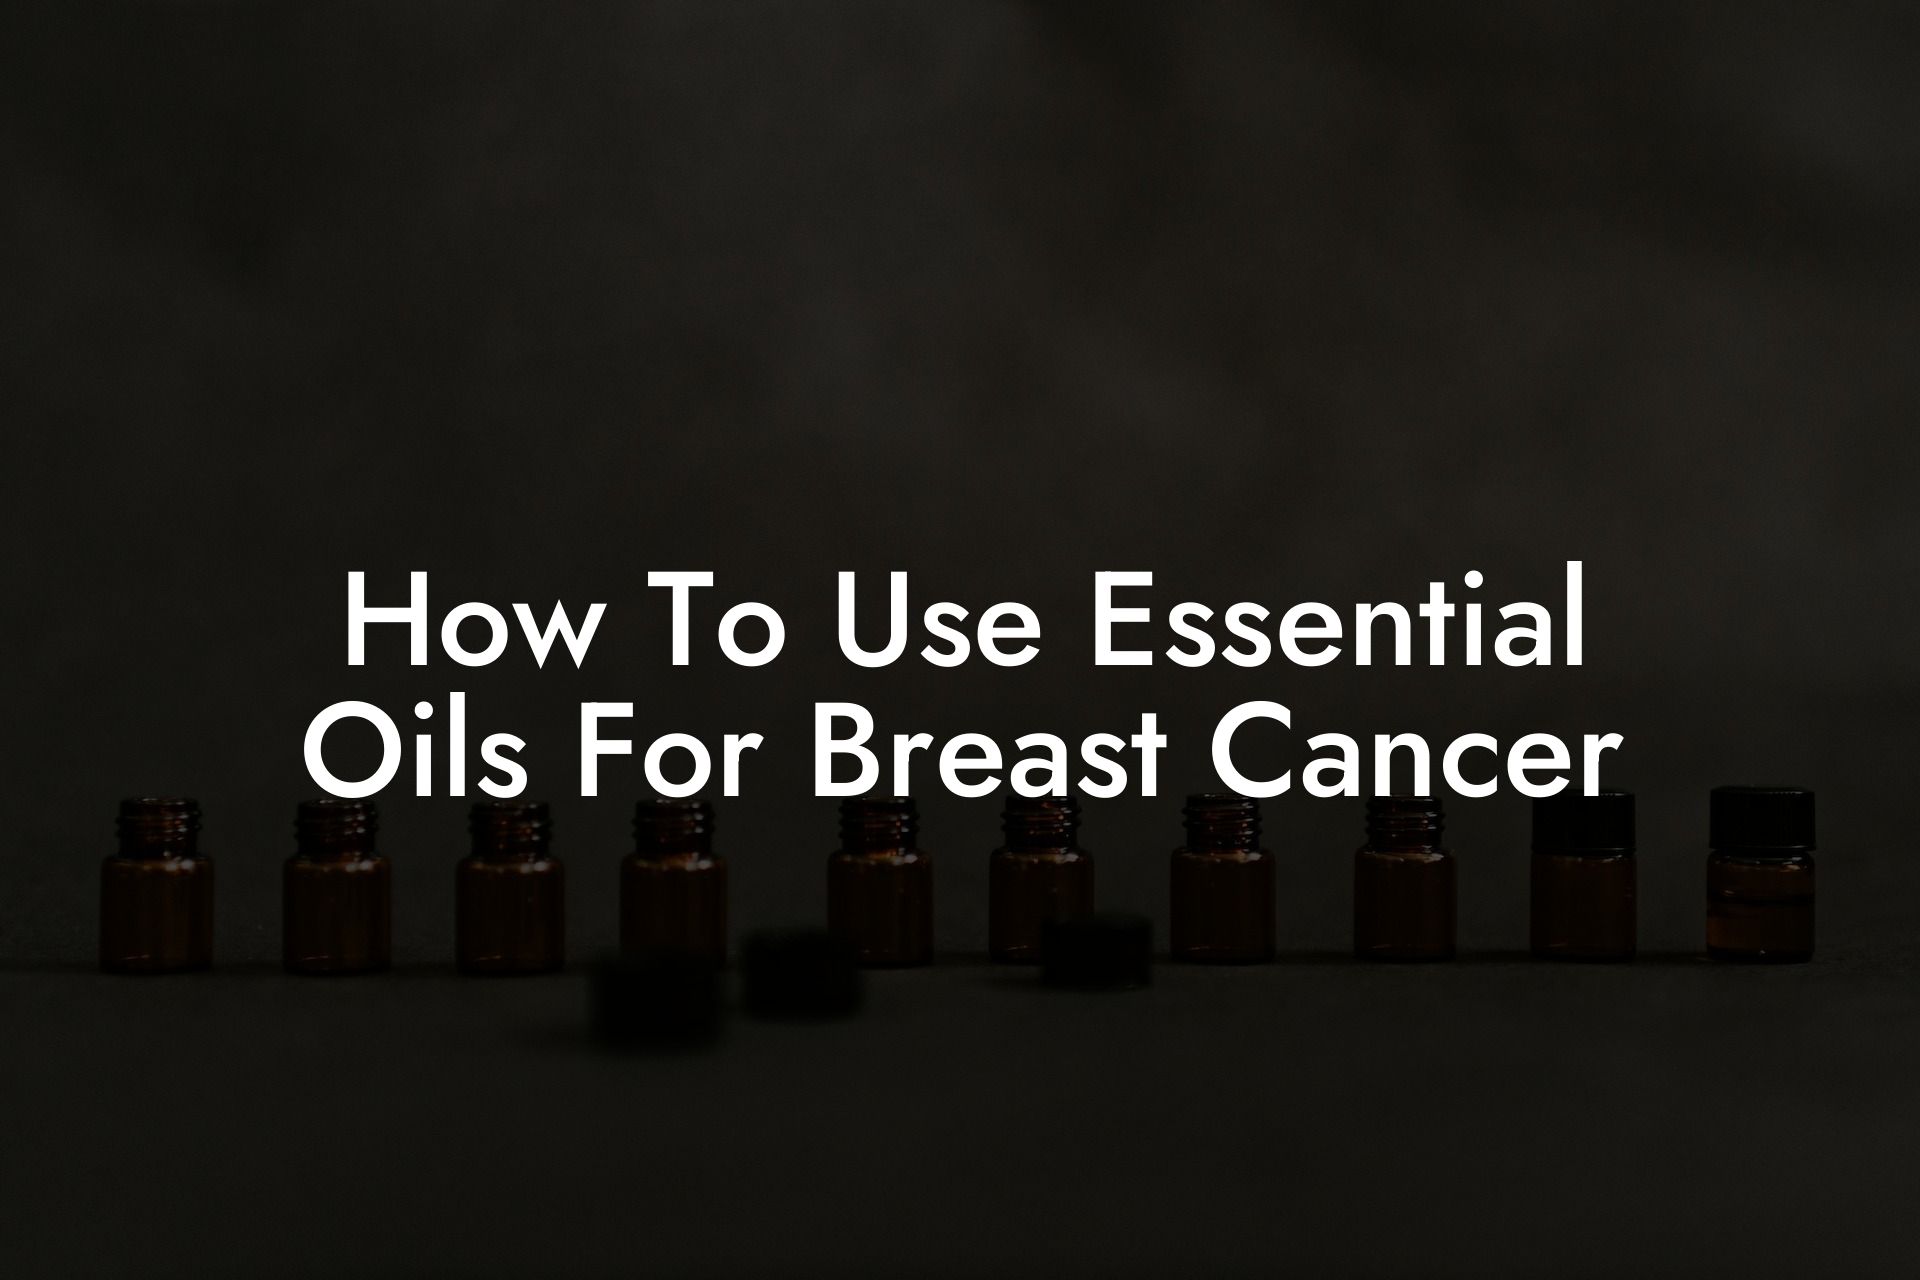 How To Use Essential Oils For Breast Cancer